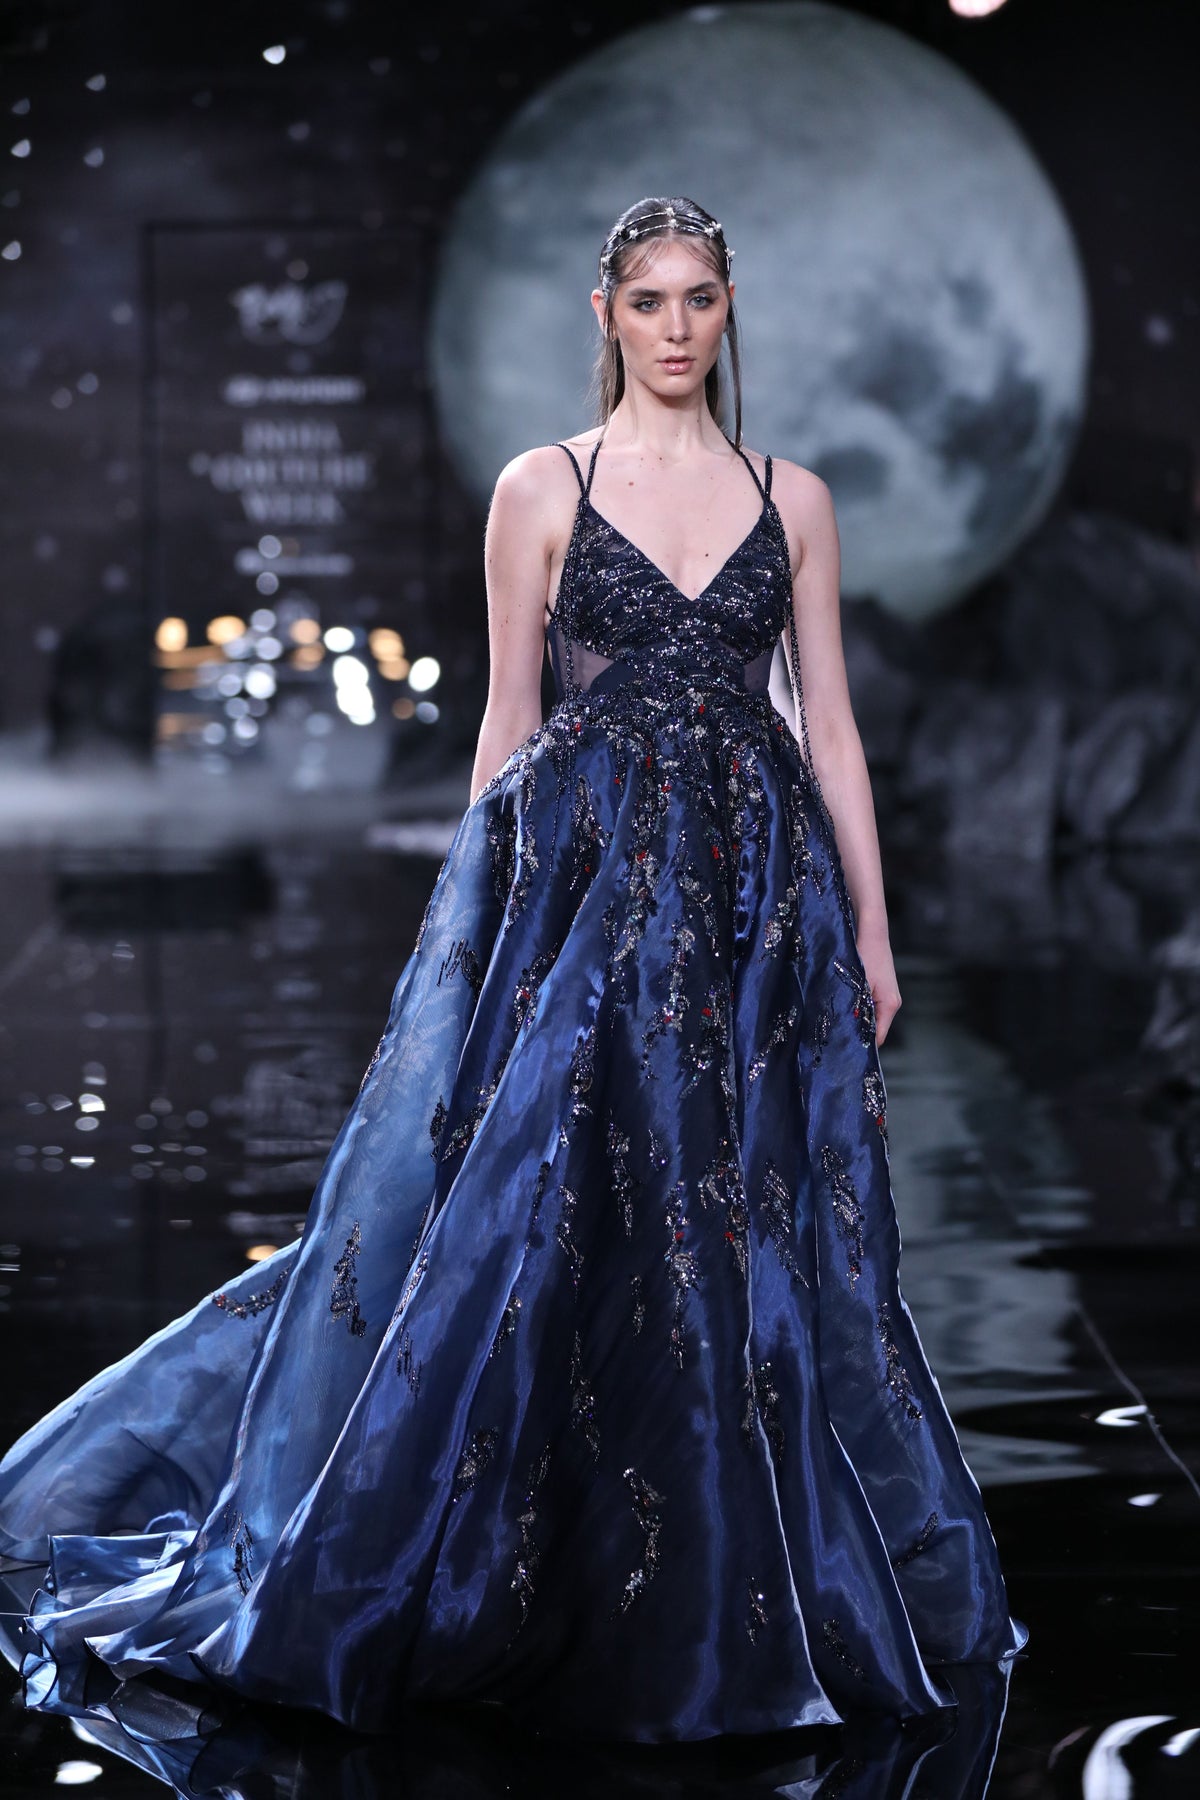 Dione Gown